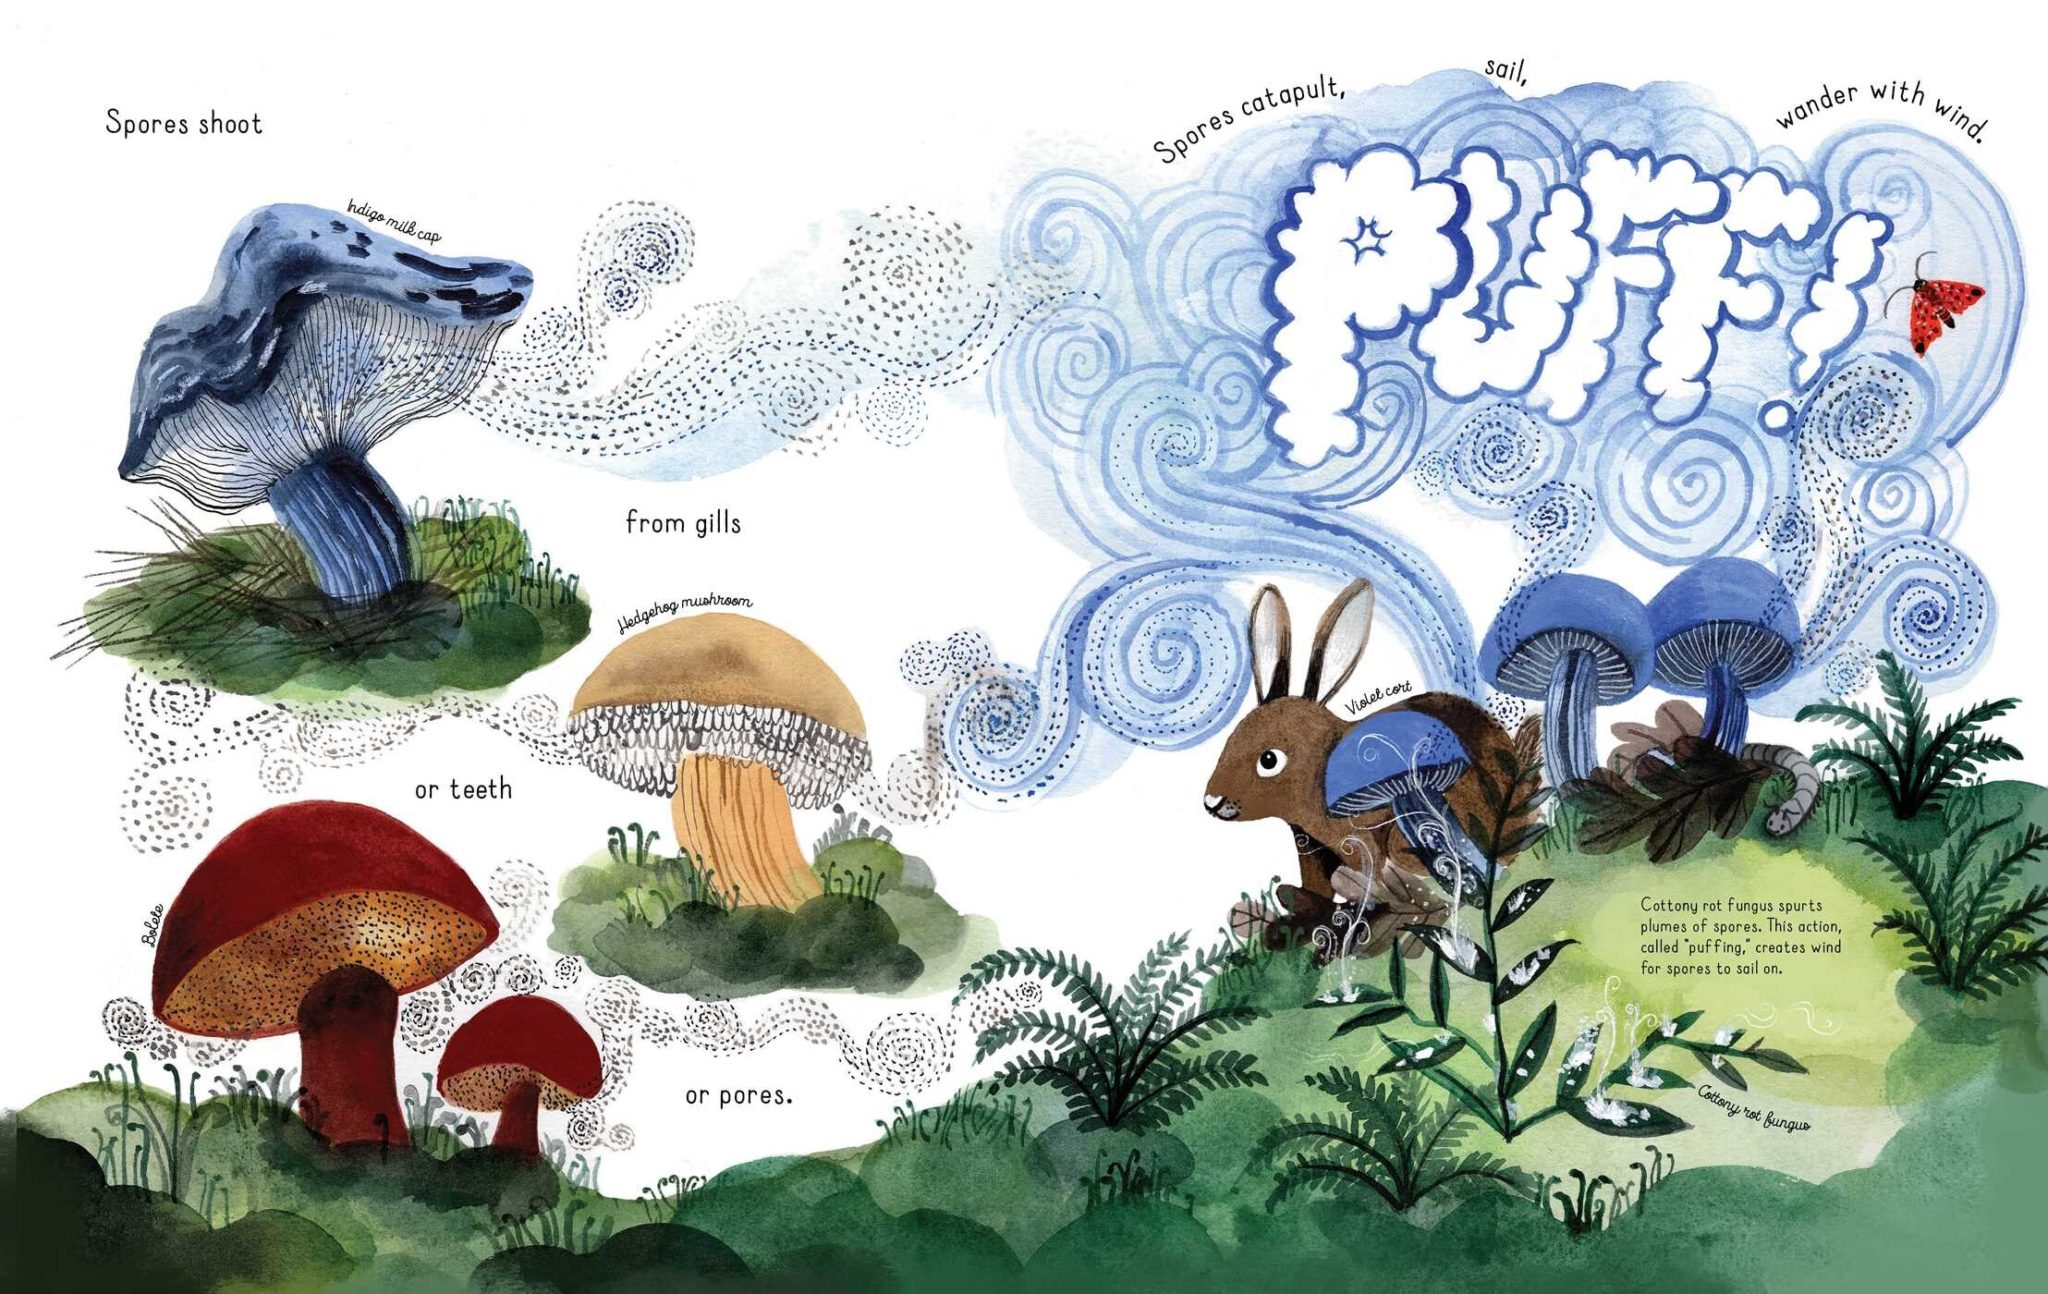 Page detail from the children's nonfiction picture book, "Fungi Grow," detailing how fungal spores can be carried off on a "puff" of wind after being "spurt[ed]" from the fungus's cap. The particular fungi highlighted on this spread include the Indigo milk cap, the Hedgehog mushroom, the Bolete, the Violet cort, and the Cottony rot fungus. 